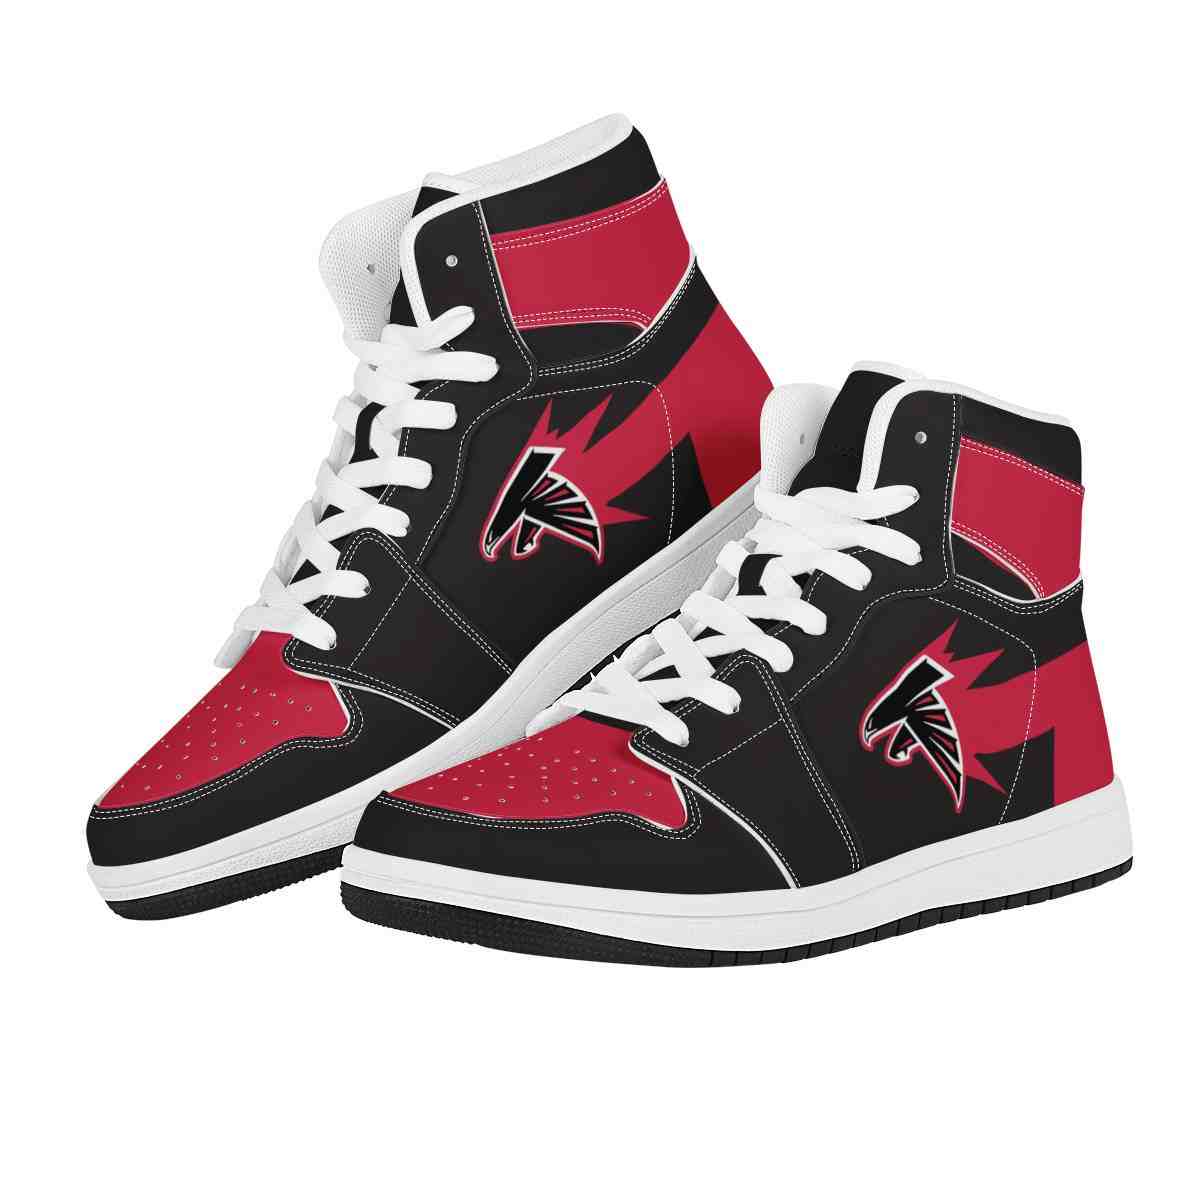 NFL Customized  shoes  Atlanta Falcons High Top Leather AJ1 Sneakers 001 Customized  shoes